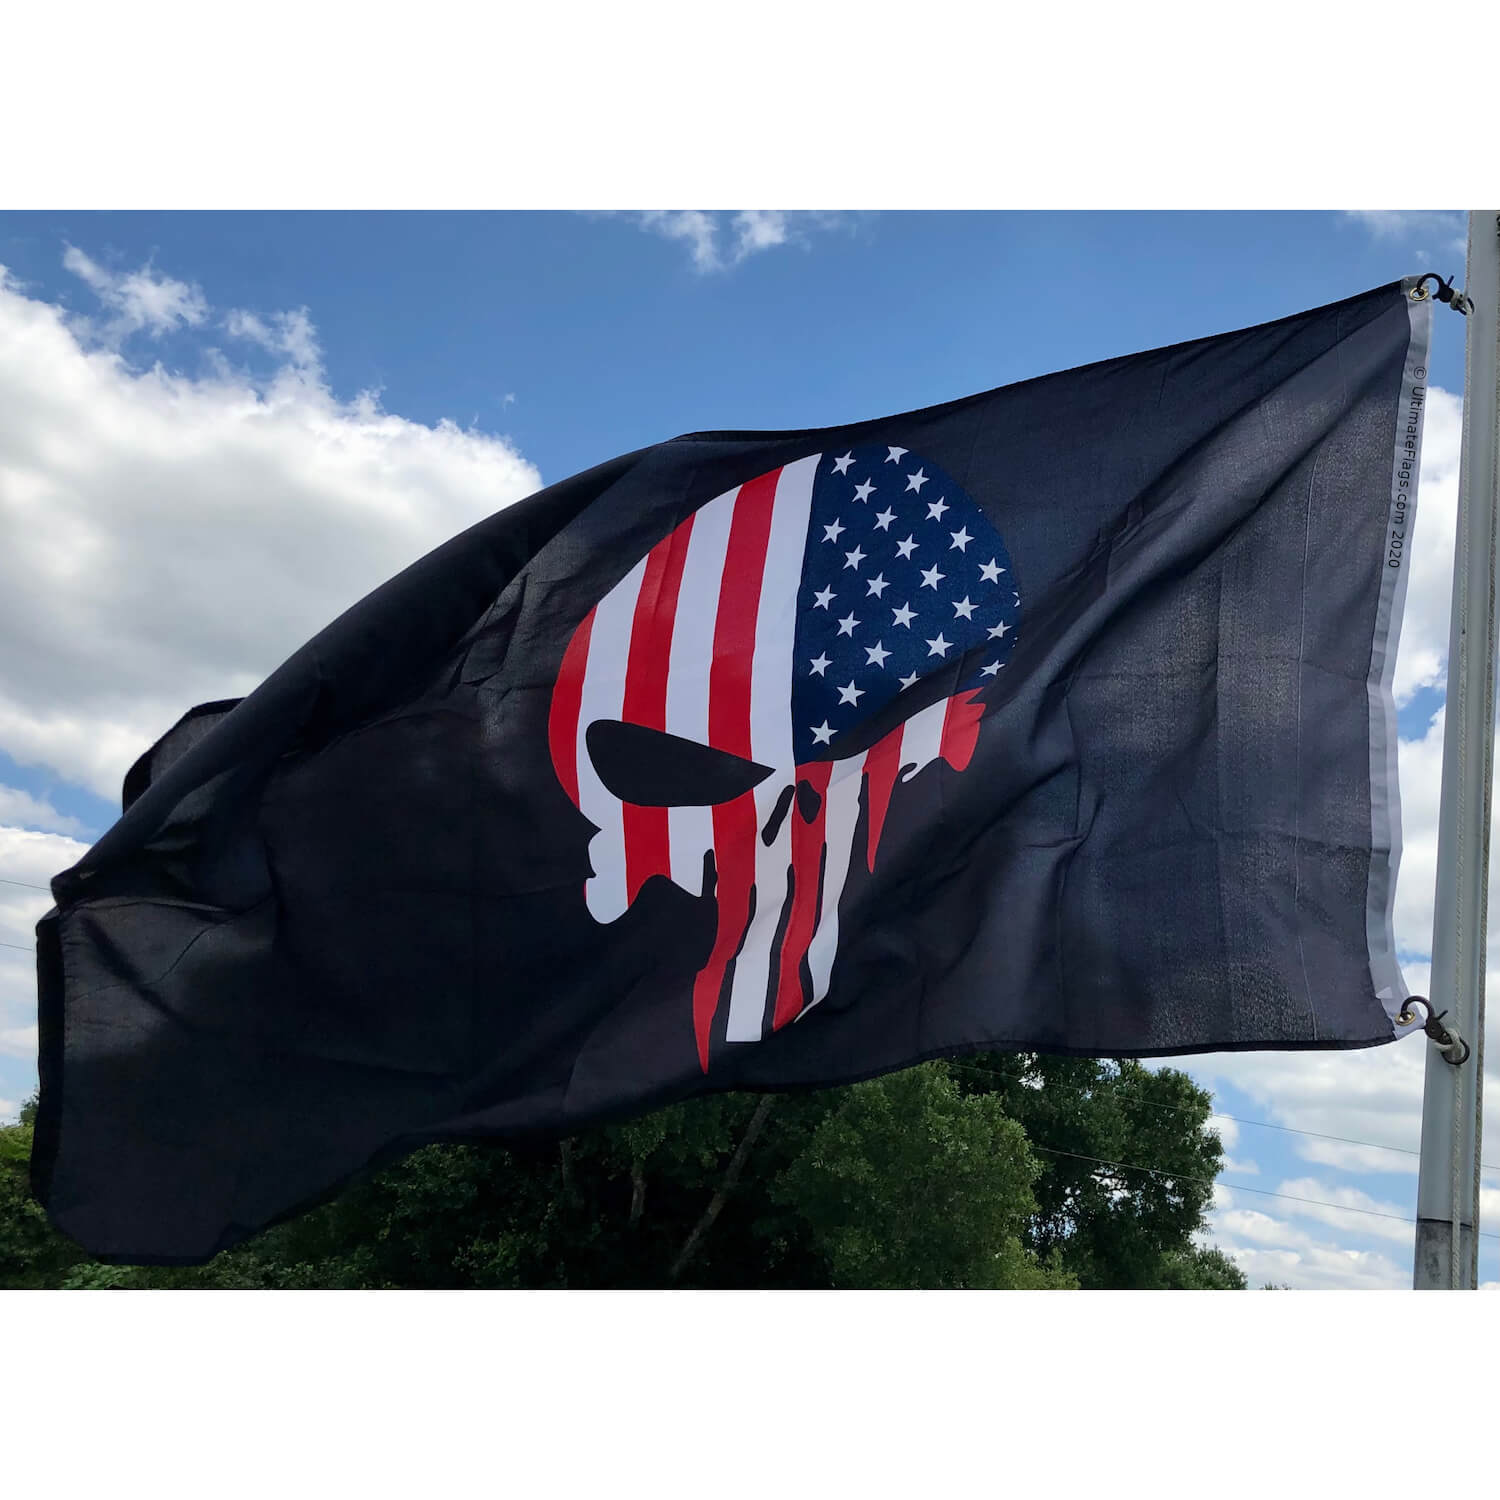 Honoring History: Ultimate Flags Inc’s Diverse Collection